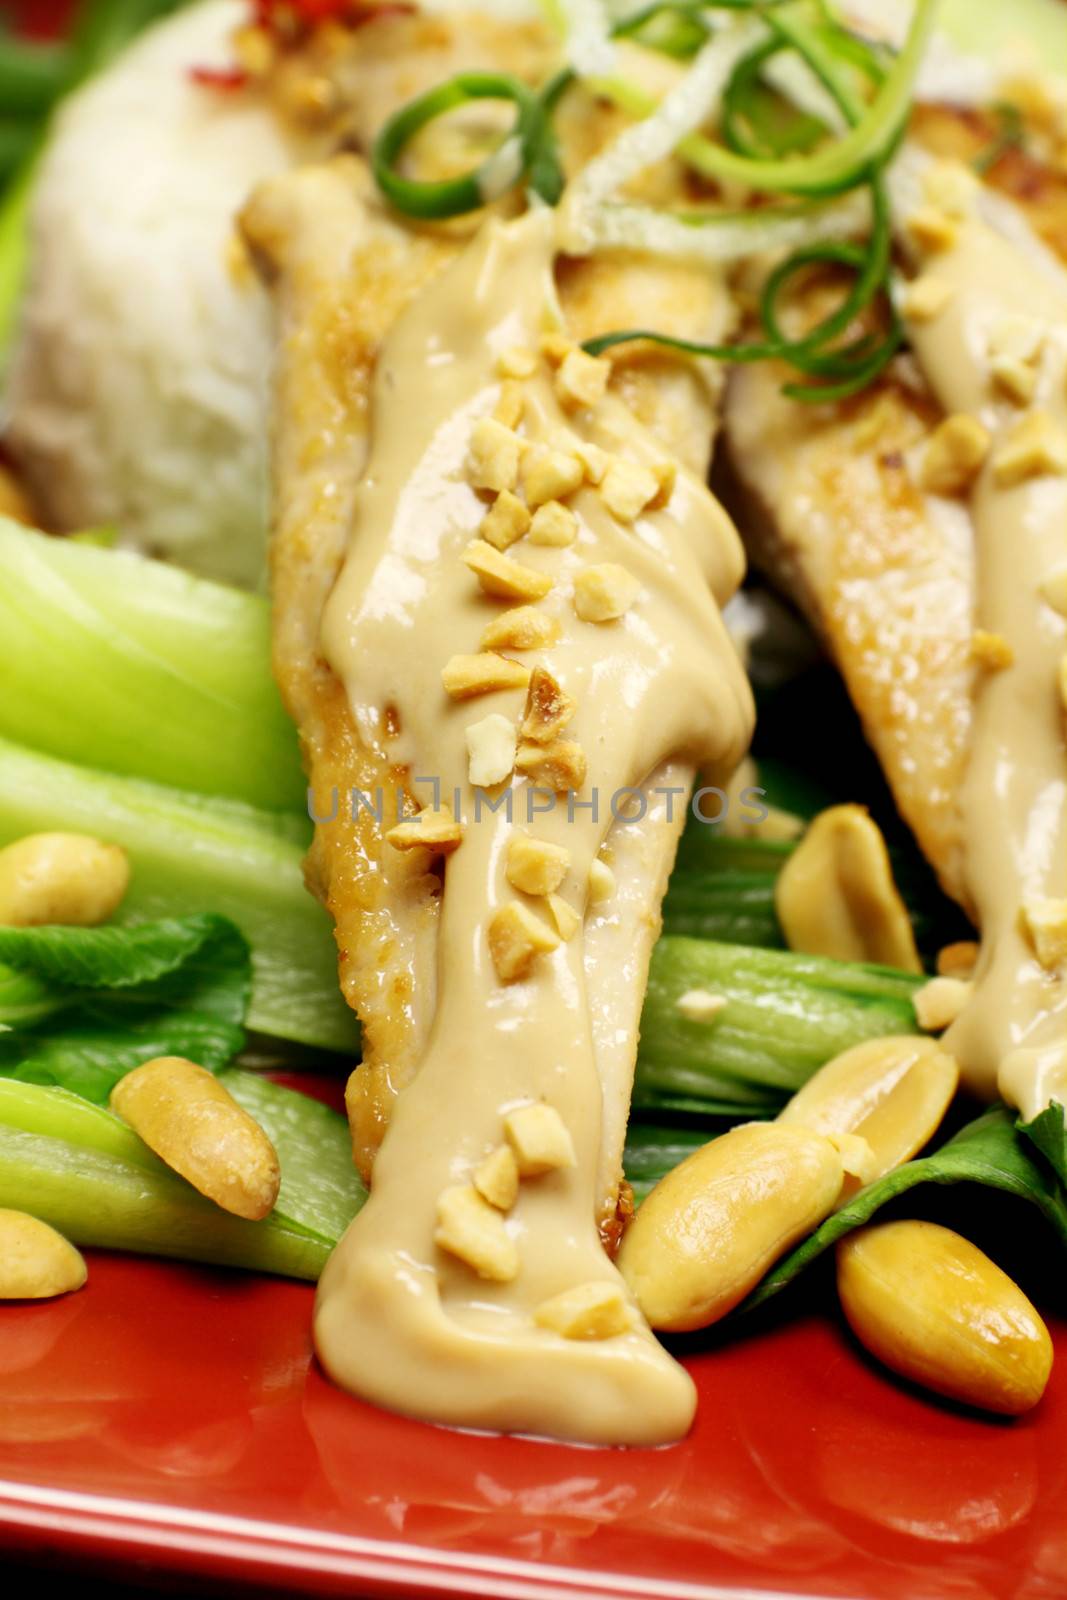 Delicious chicken satay skewers with peanut sauce.